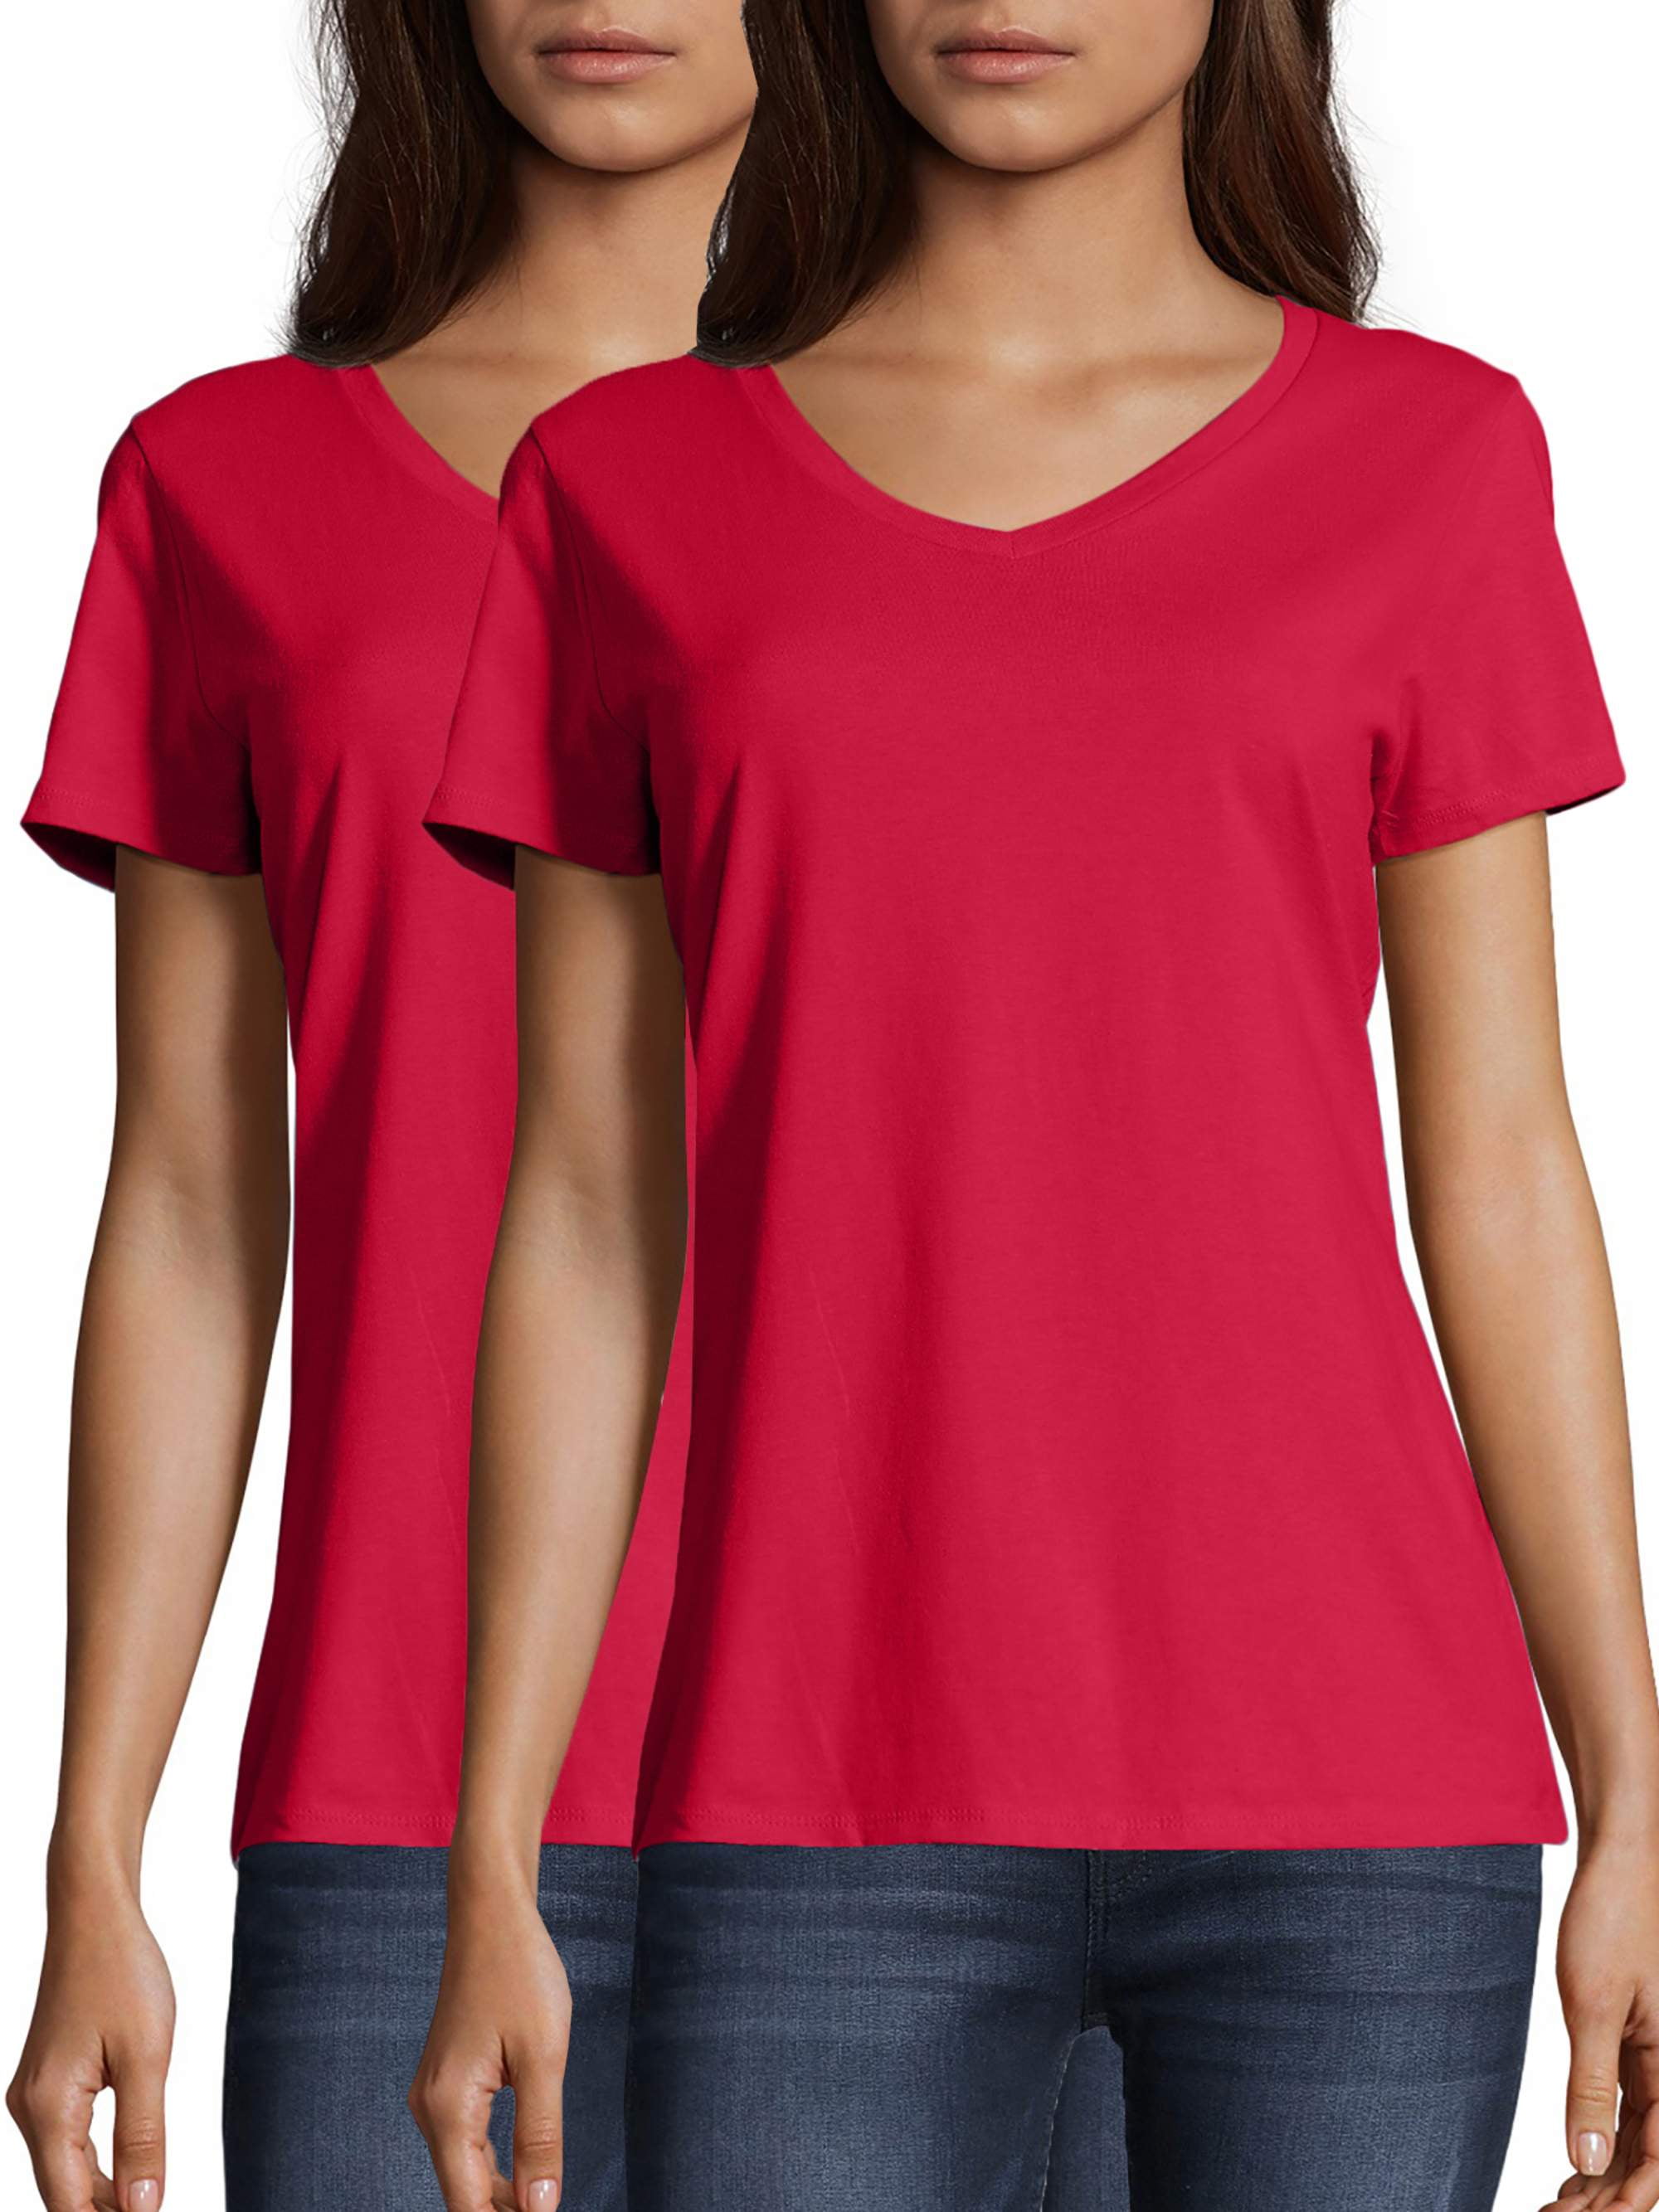 Hanes Tagless Tee Hanes Tagless Tee T-Shirt Details about   Machine washable Faster Please 